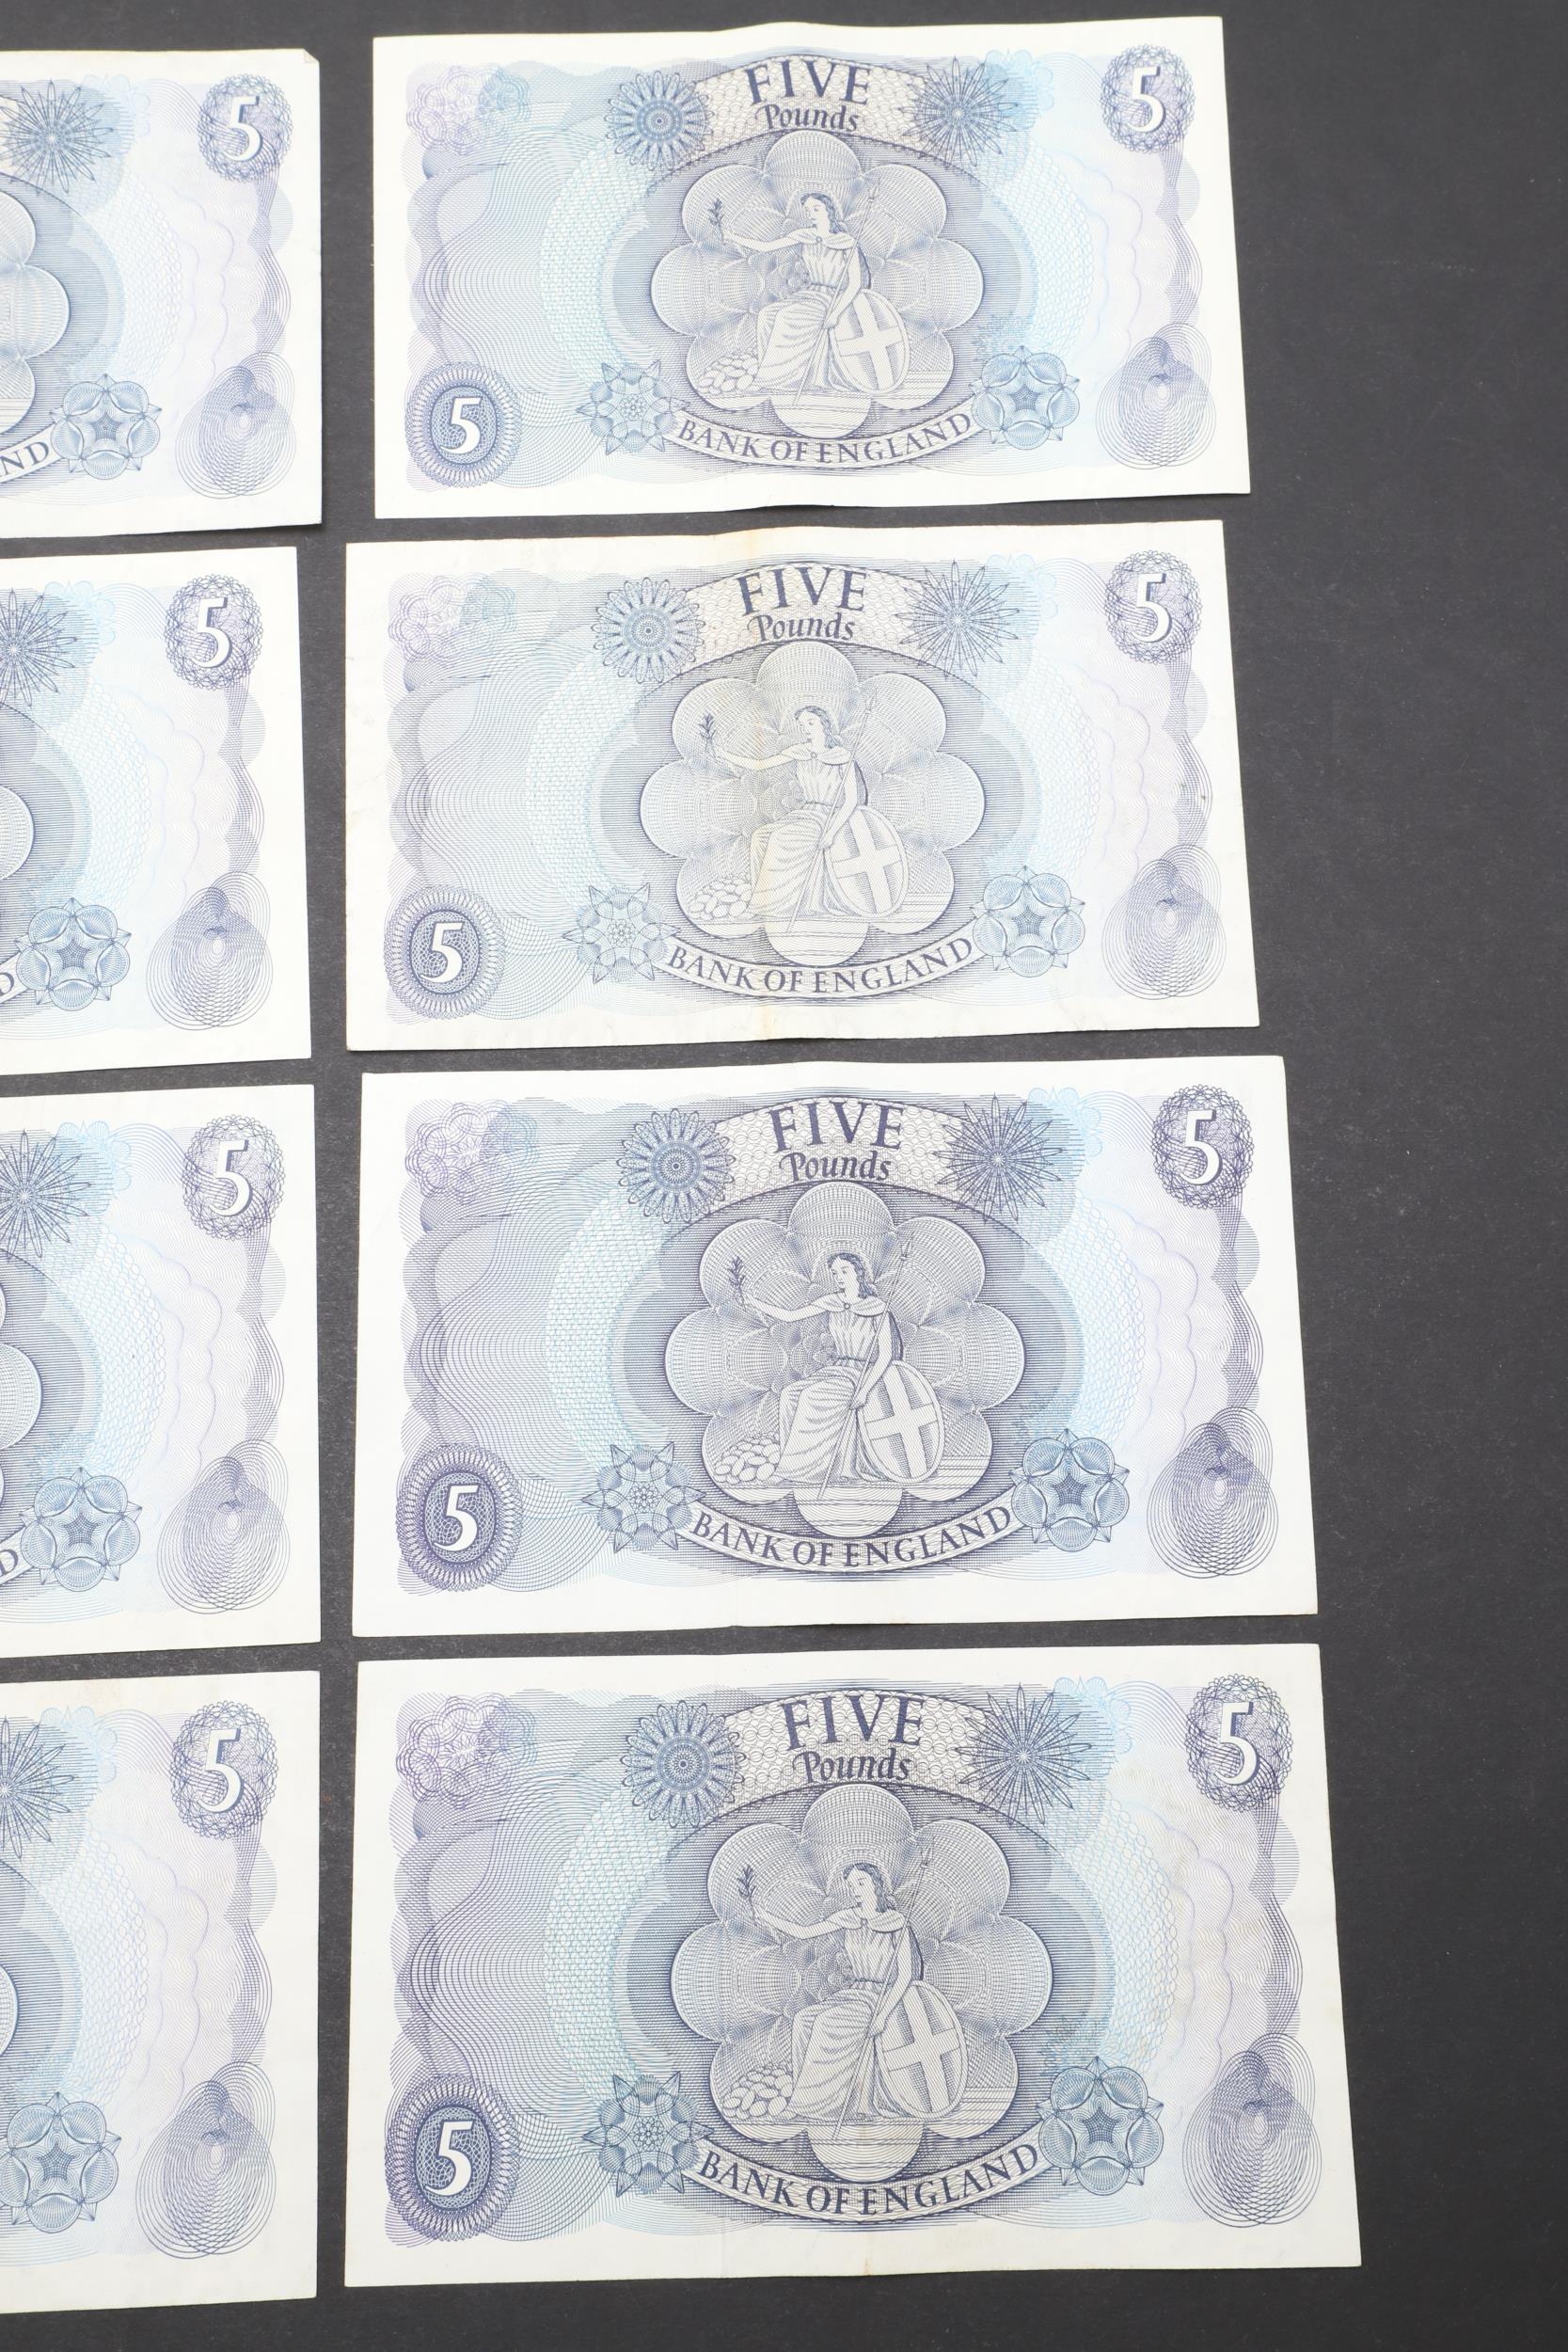 A COLLECTION OF 42 BANK OF ENGLAND SERIES 'C' FIVE POUND NOTES. - Image 13 of 13